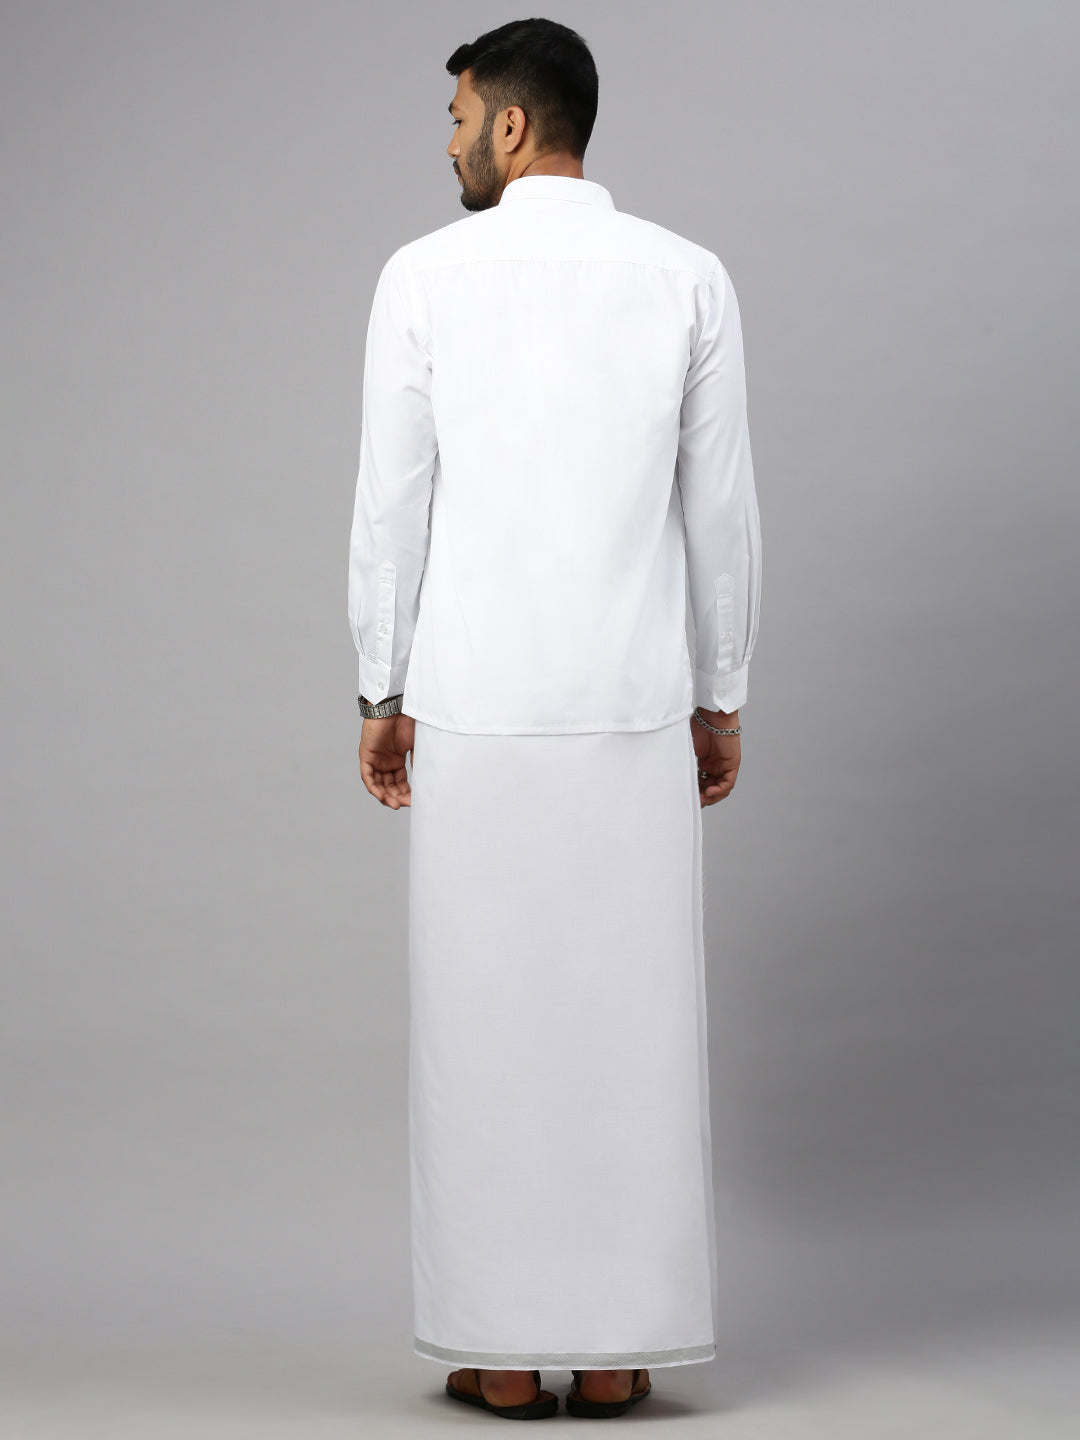 Mens Double Dhoti White with Silver Jari 3/4" Ivory